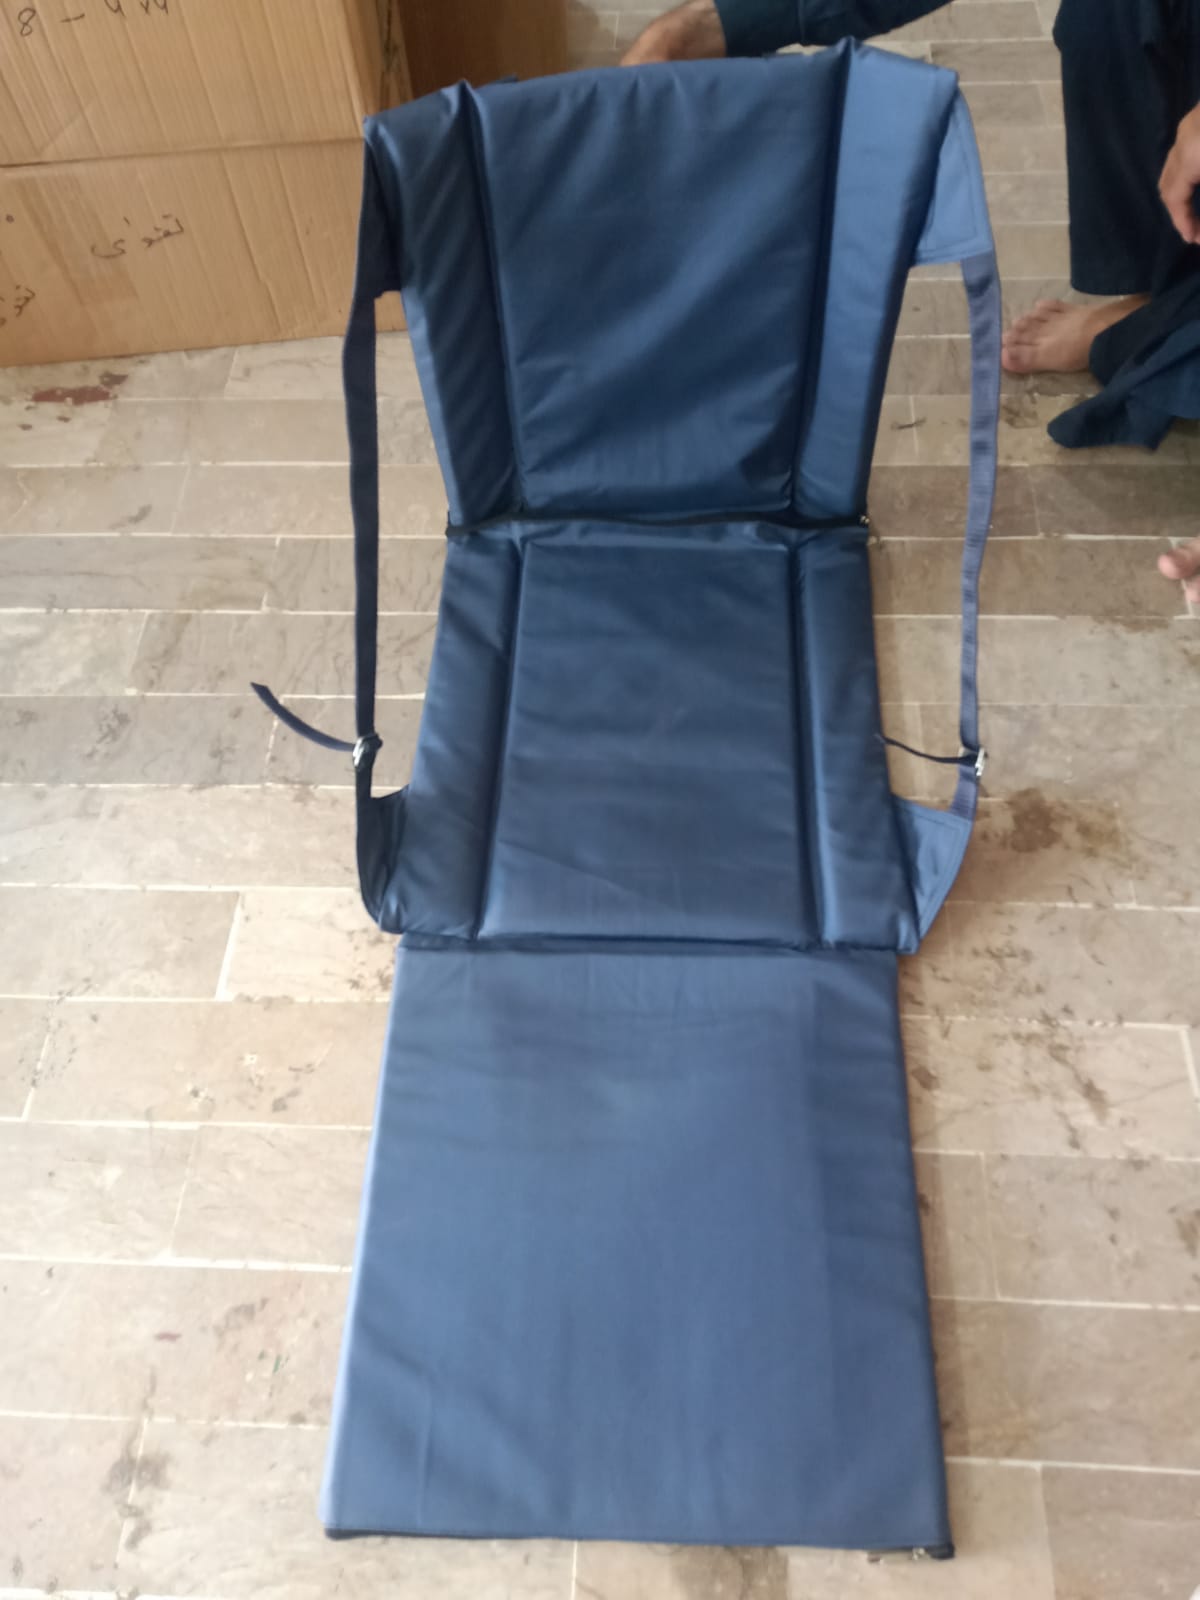 Chair Form (Foldable)